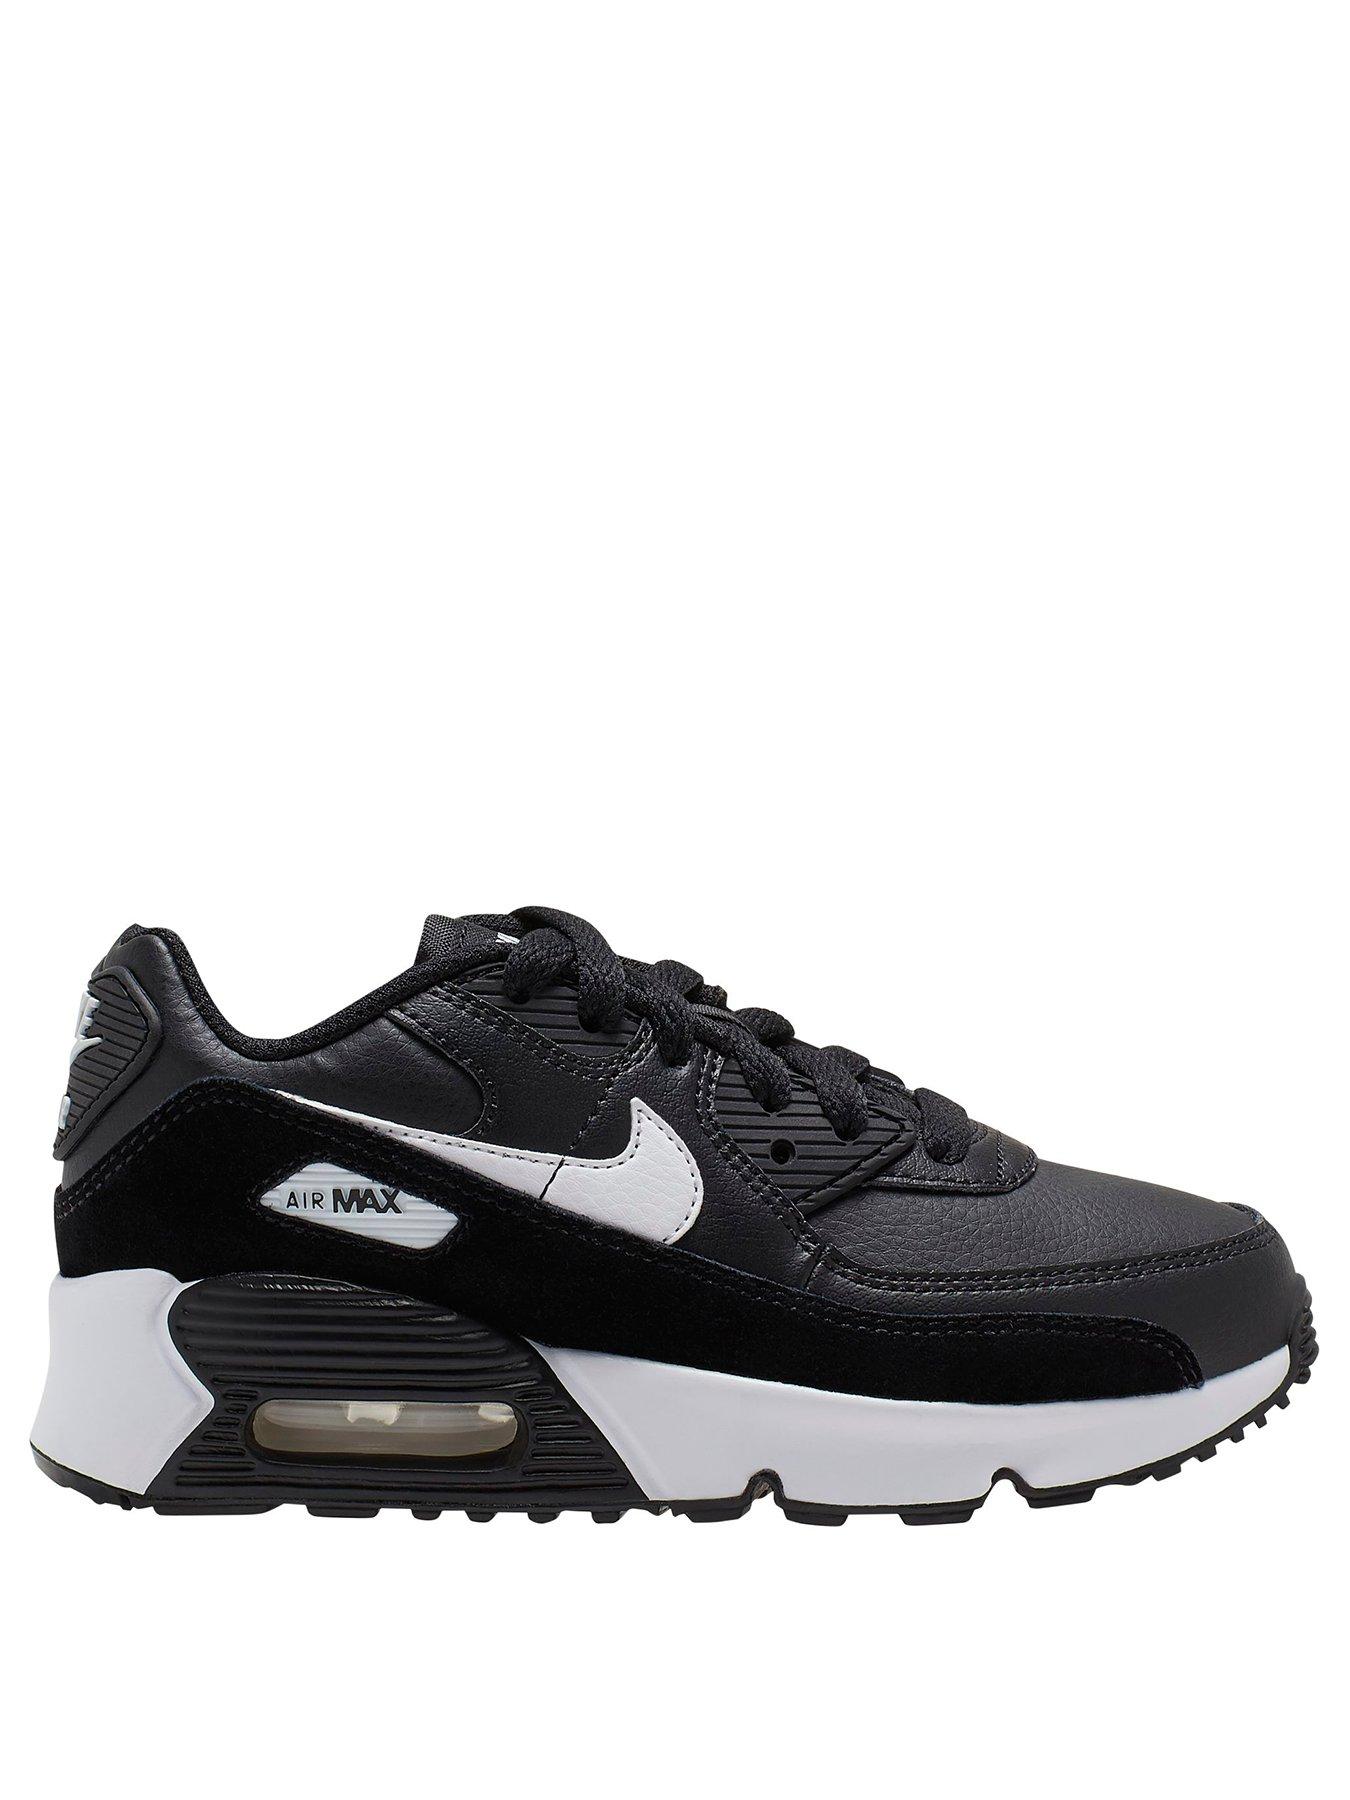 nike air max childrens size 2